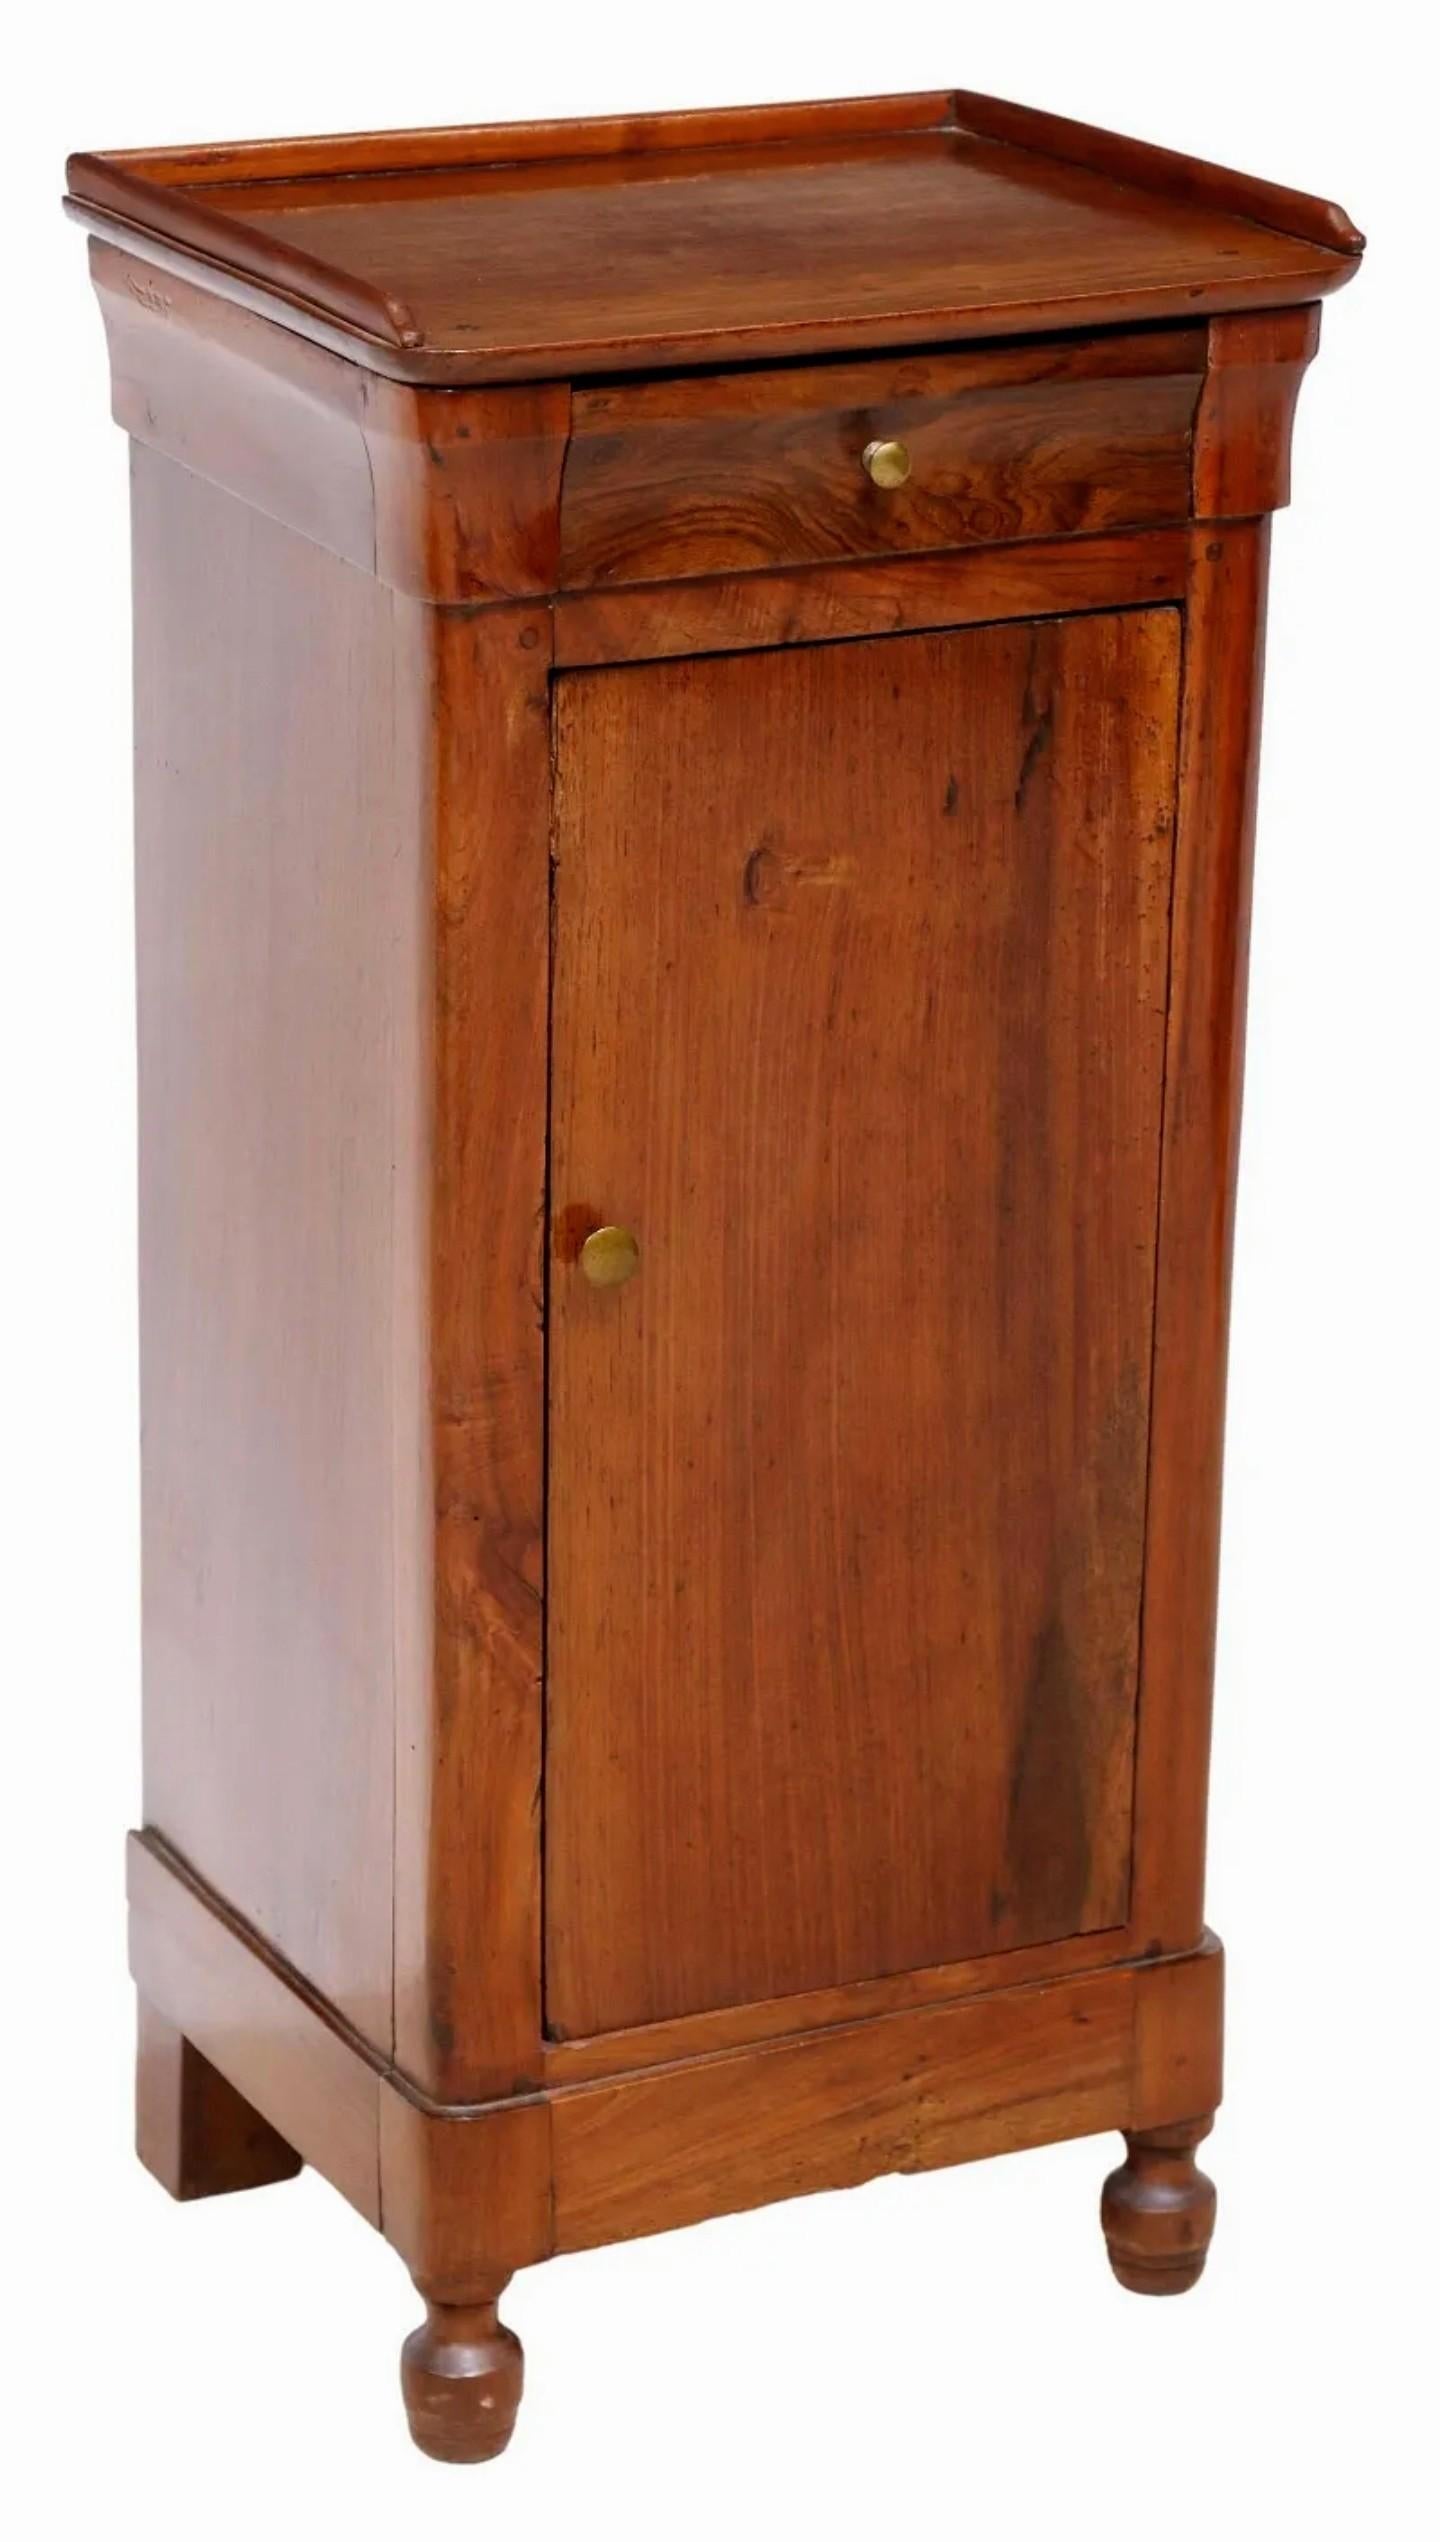 A nearly 200 year old period Louis Philippe (1830-1848) French walnut bedside cabinet with beautifully aged warm rustic patina!

Hand-crafted in France in the mid-19th century, having a rectangular top with three-quarter gallery, classic